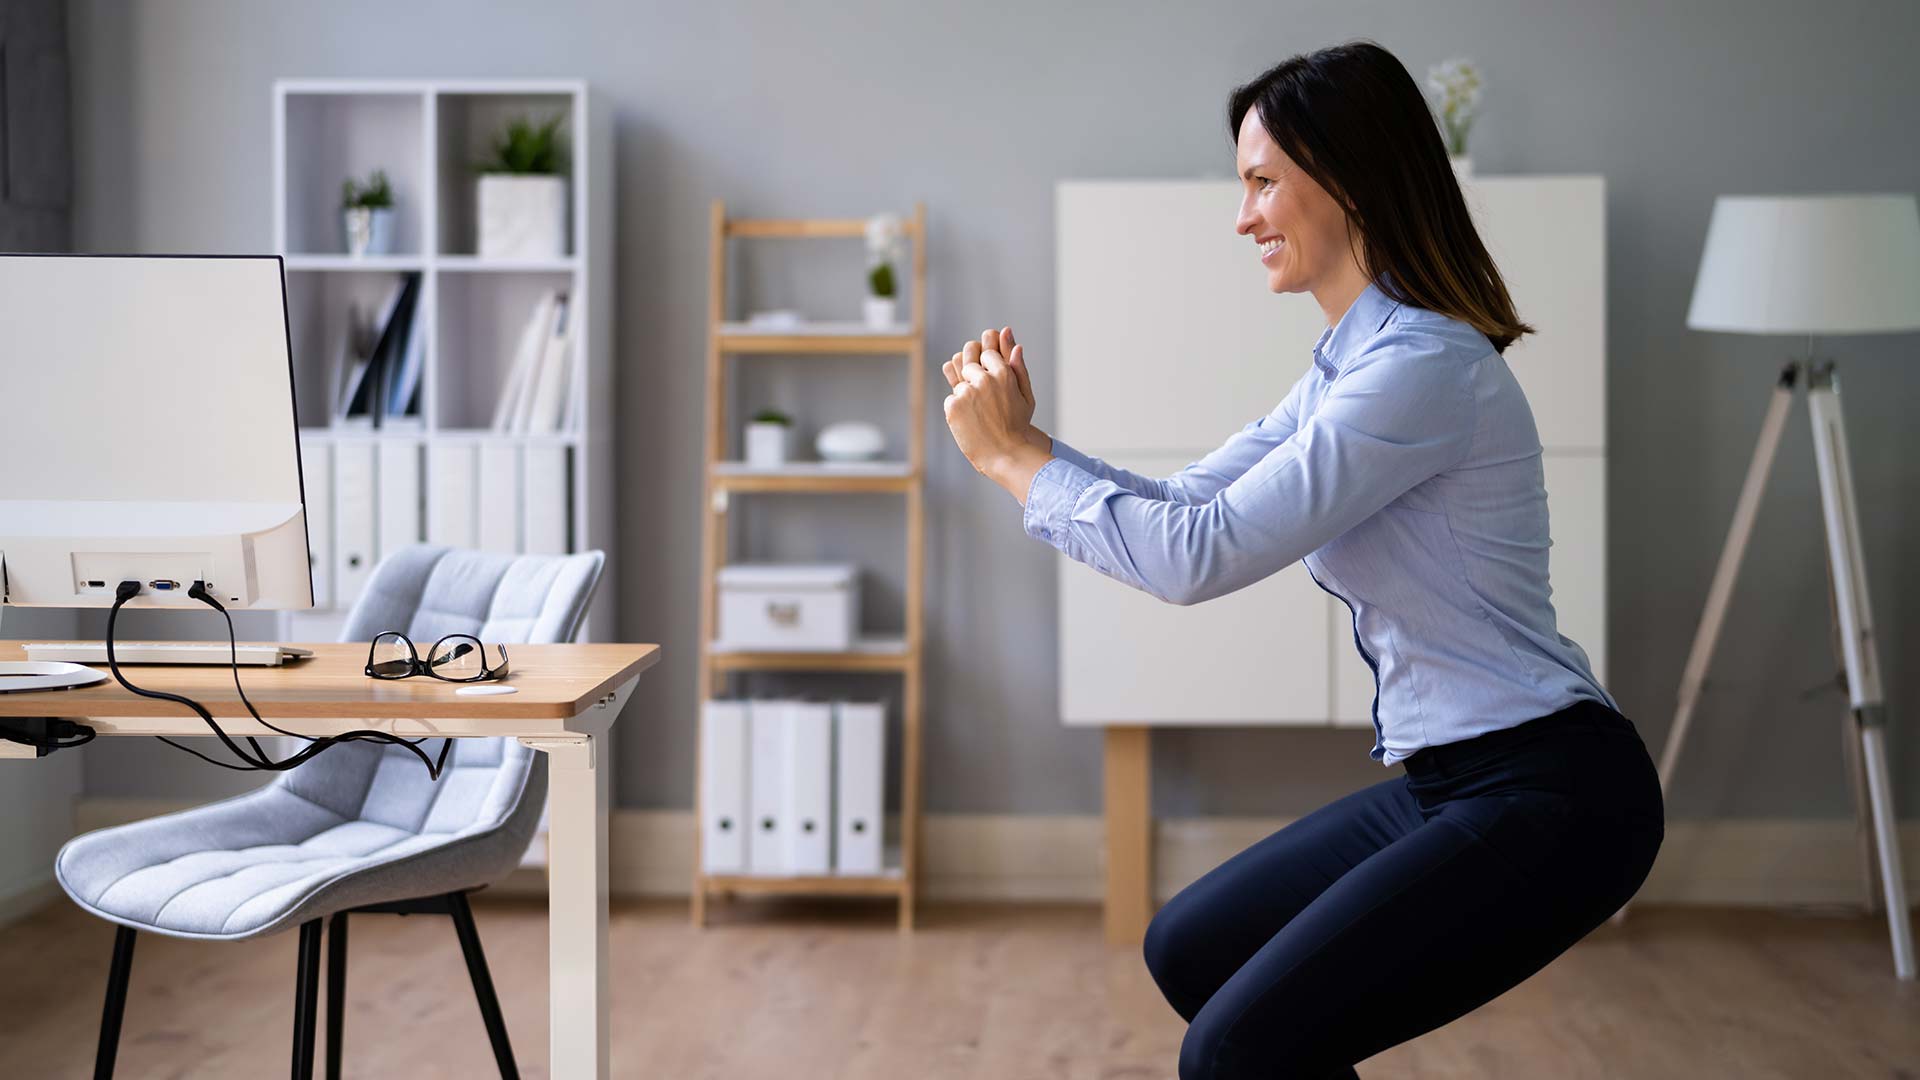 Desk Exercises: How to Do Them and Why They're Important